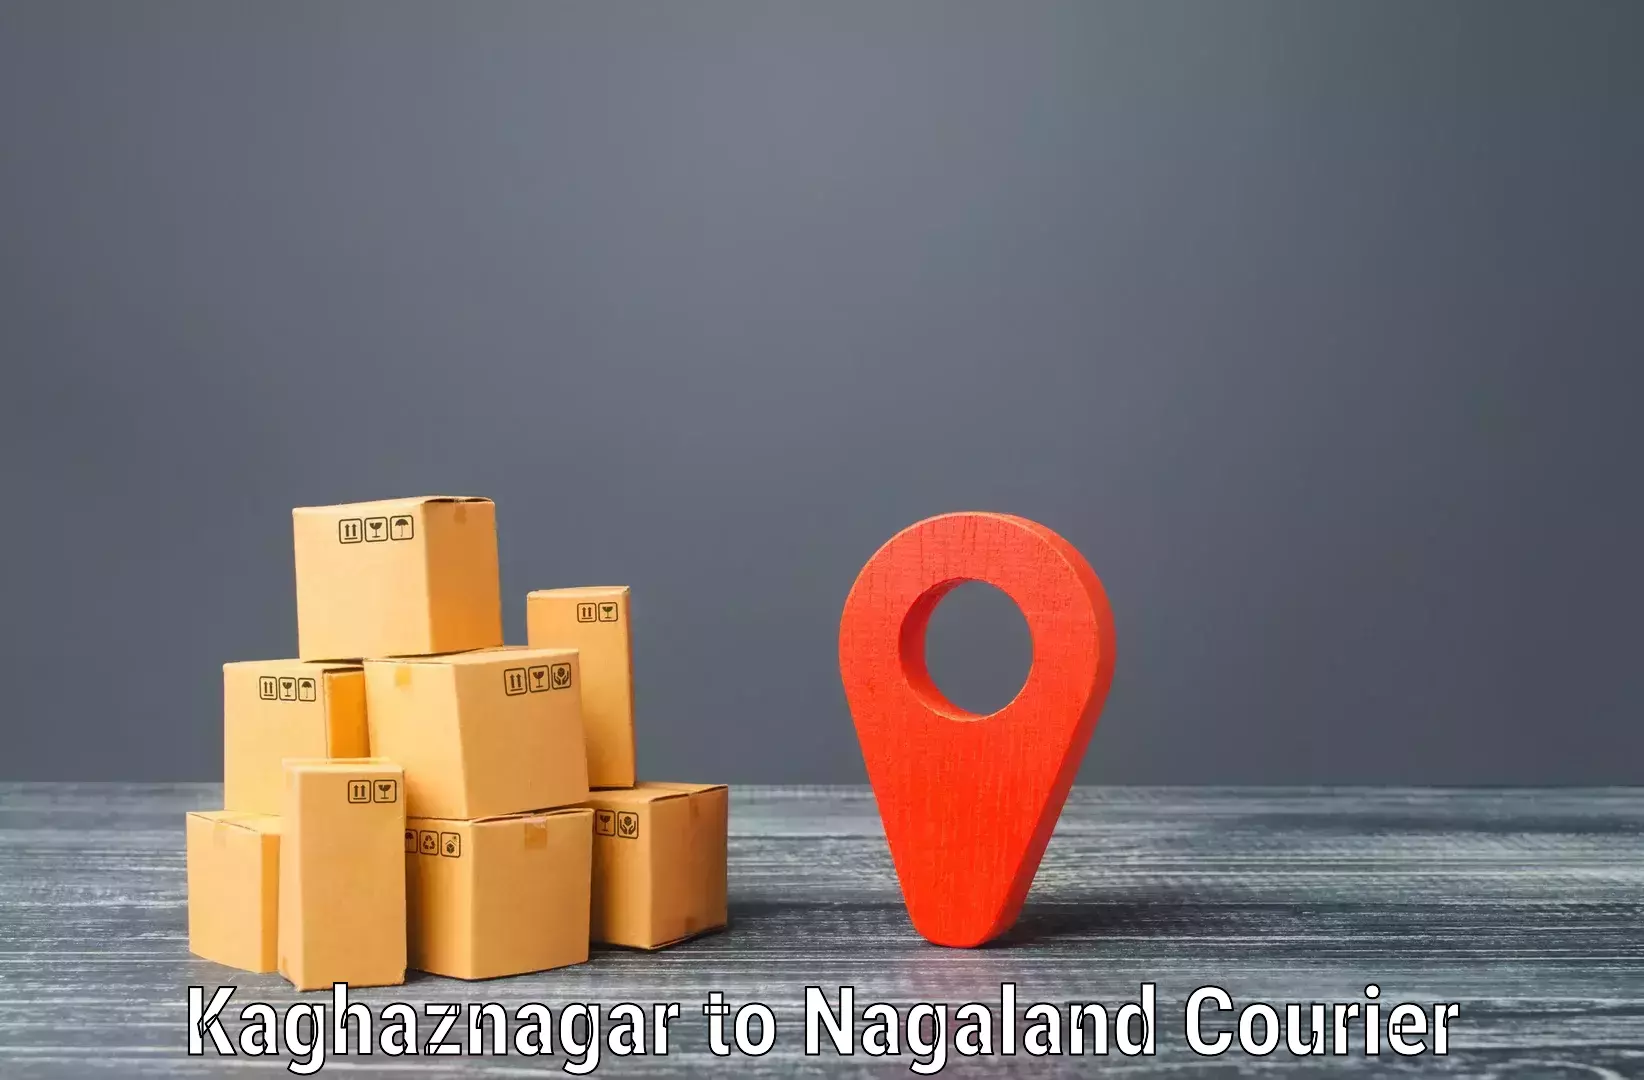 Sustainable delivery practices Kaghaznagar to Nagaland